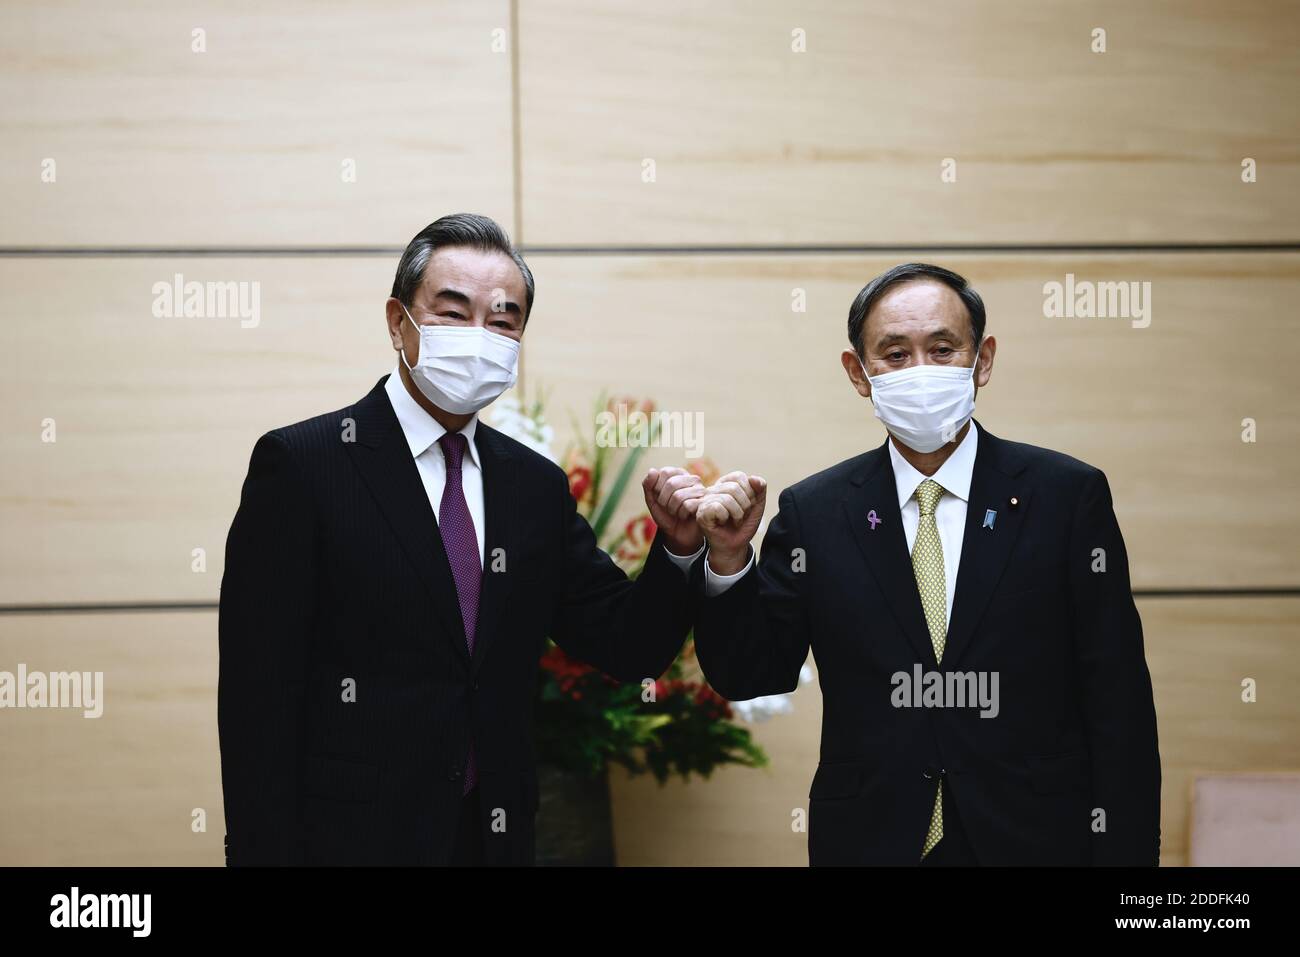 Tokyo, Japan. 25th Nov, 2020. Japan's Prime Minister Yoshihide Suga (R) bumps elbows with China's Foreign Minister Wang Yi (L) at the start of their meeting in Tokyo on November 25, 2020. Credit: POOL/ZUMA Wire/Alamy Live News Stock Photo